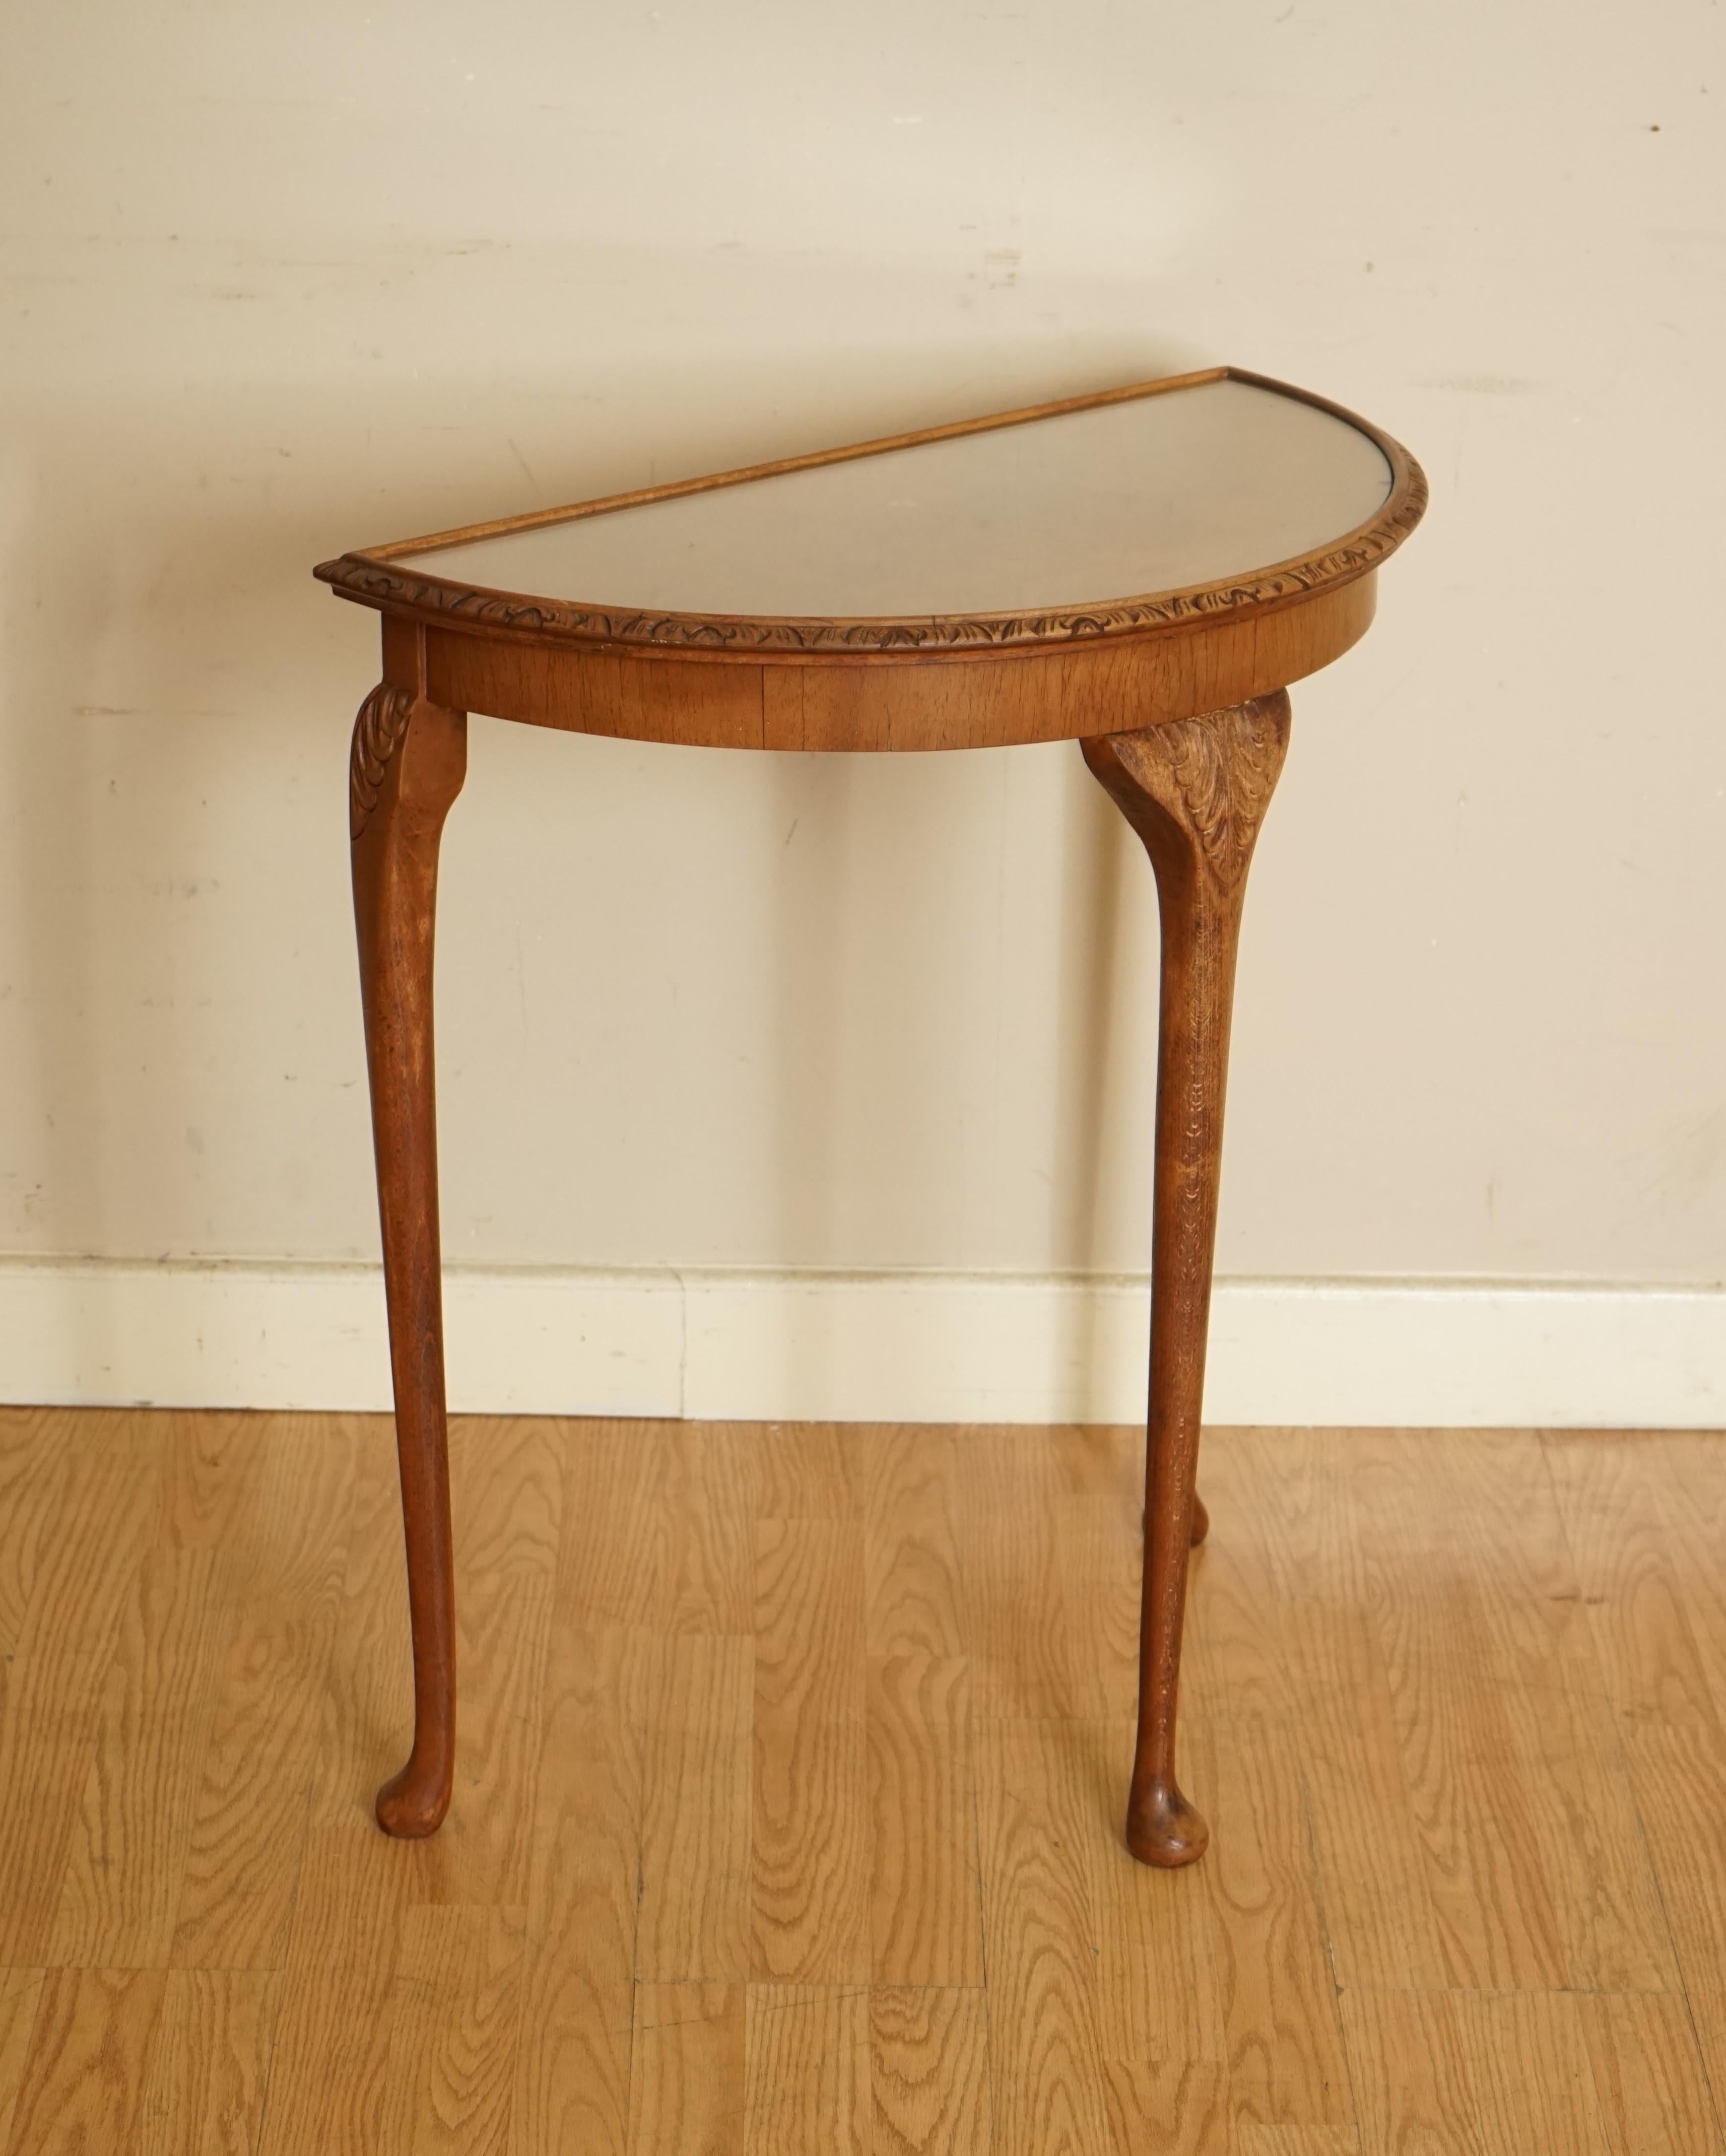 We are so excited to present to you this gorgeous burr walnut console table.

Please carefully look at the pictures to see the condition before purchasing as they form part of the description. 



Measurements

Height - 74 cm
Width - 66